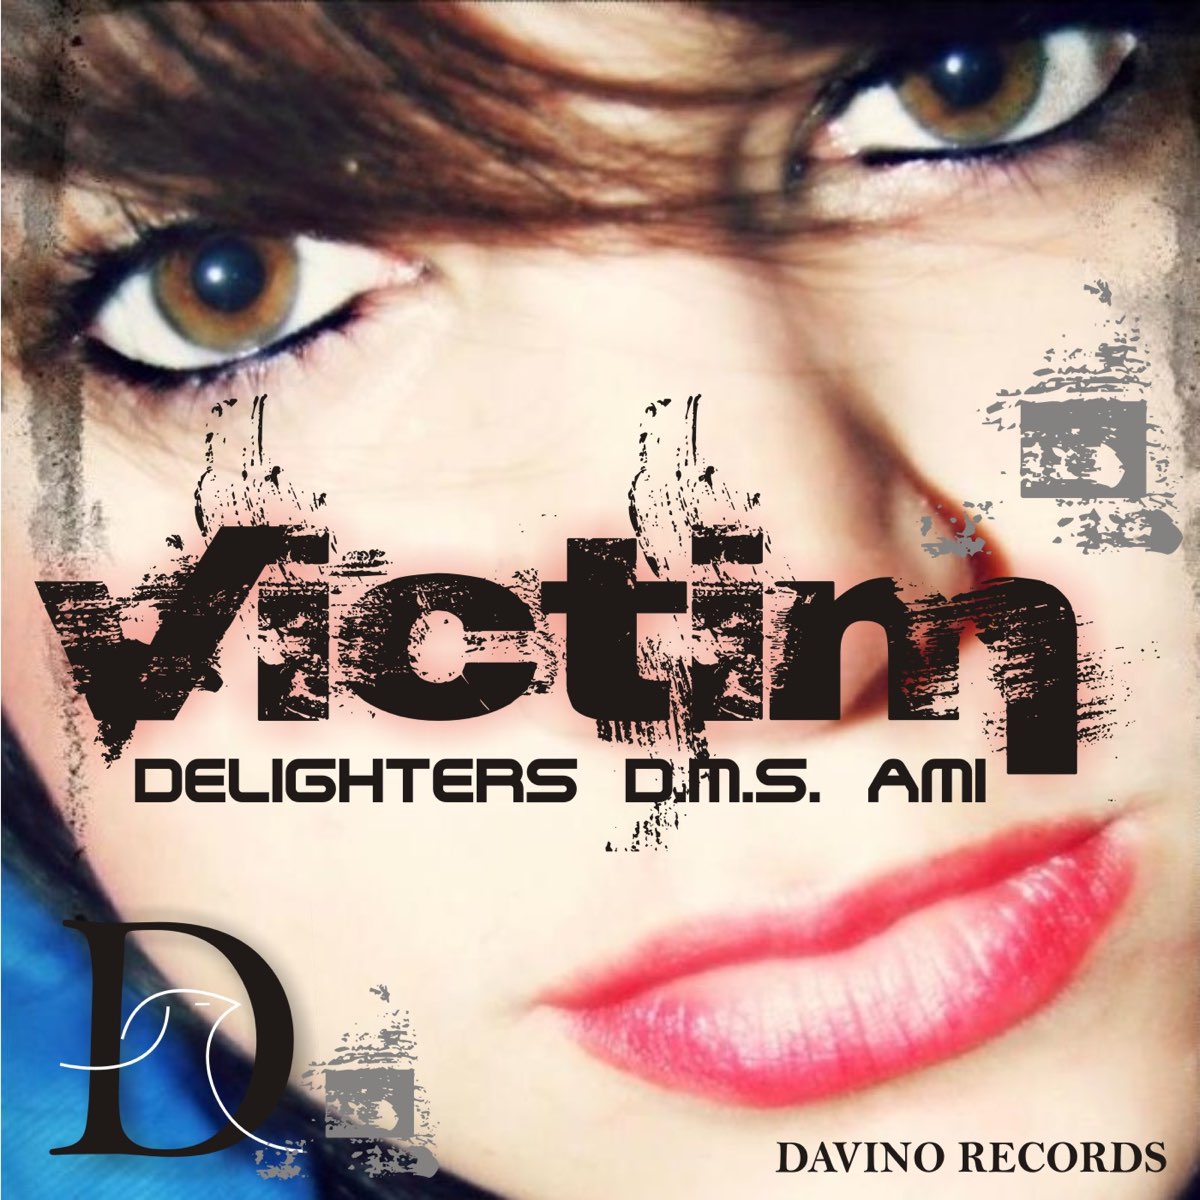 Delighters. Victim! (Feat. Flowerrboi). I am a victim of this Song. Текст песни victim